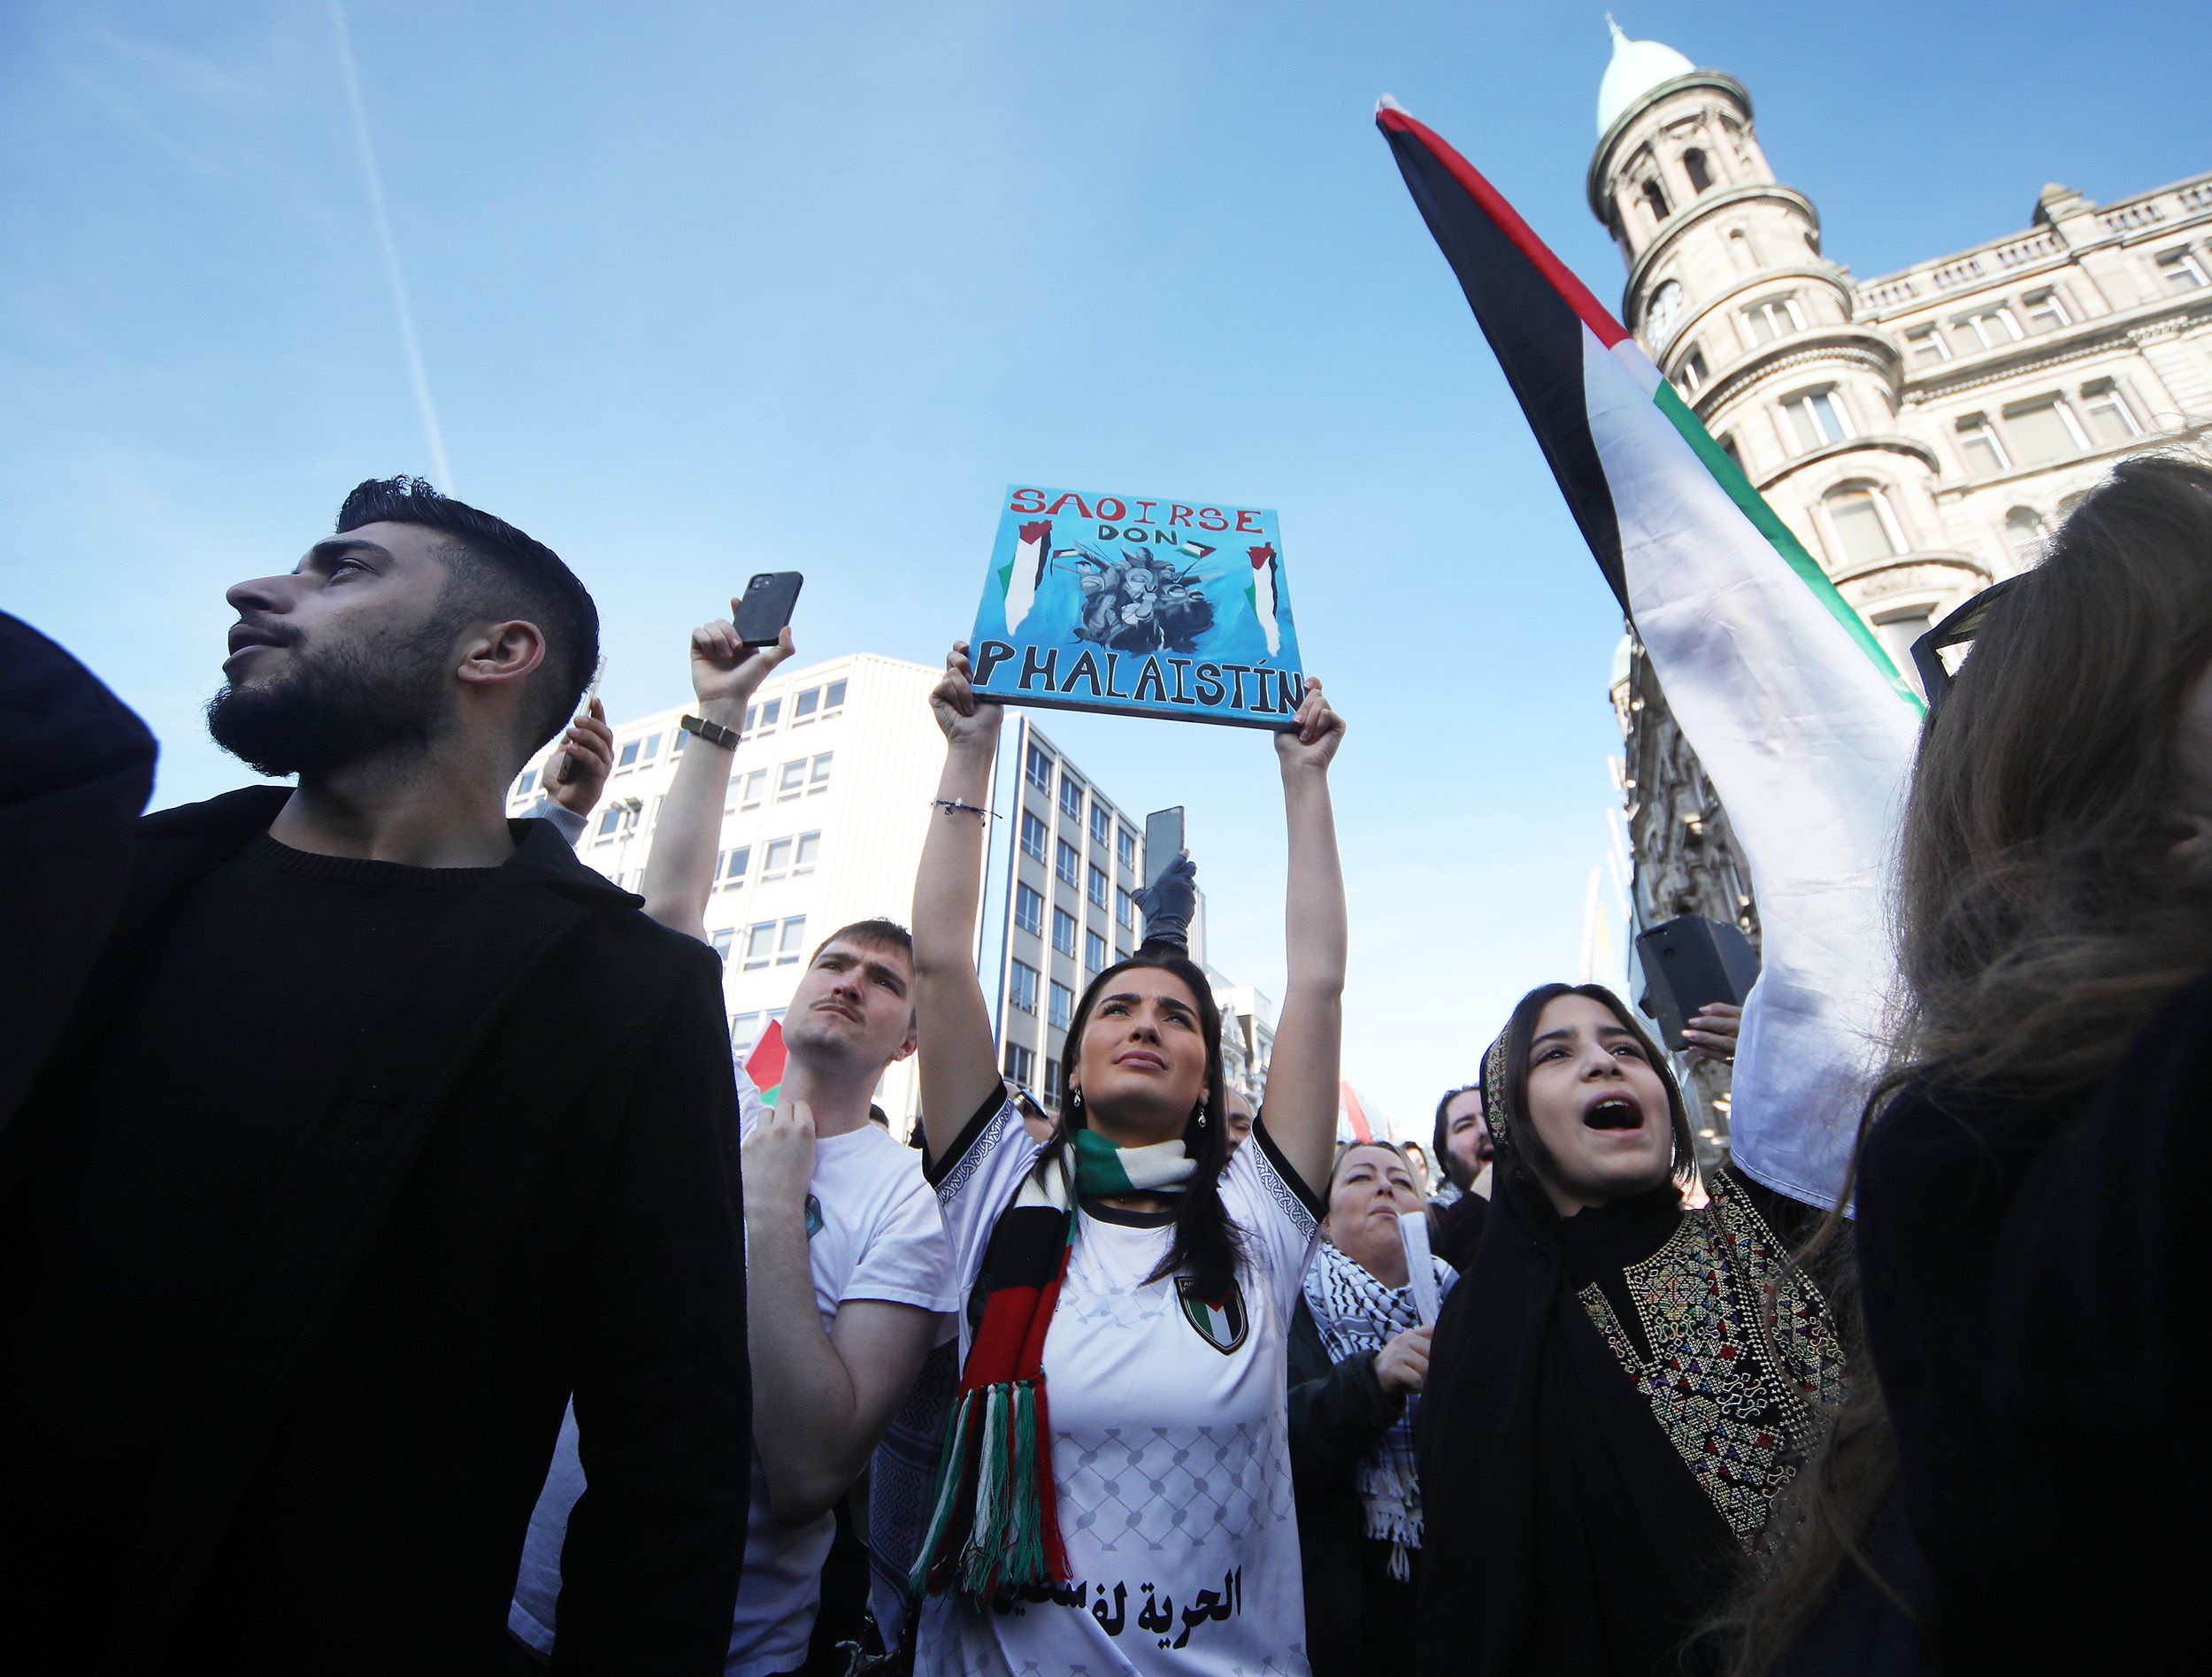 FREEDOM: Palestinian supporters have taken to the streets of Belfast in their thousands in recent months